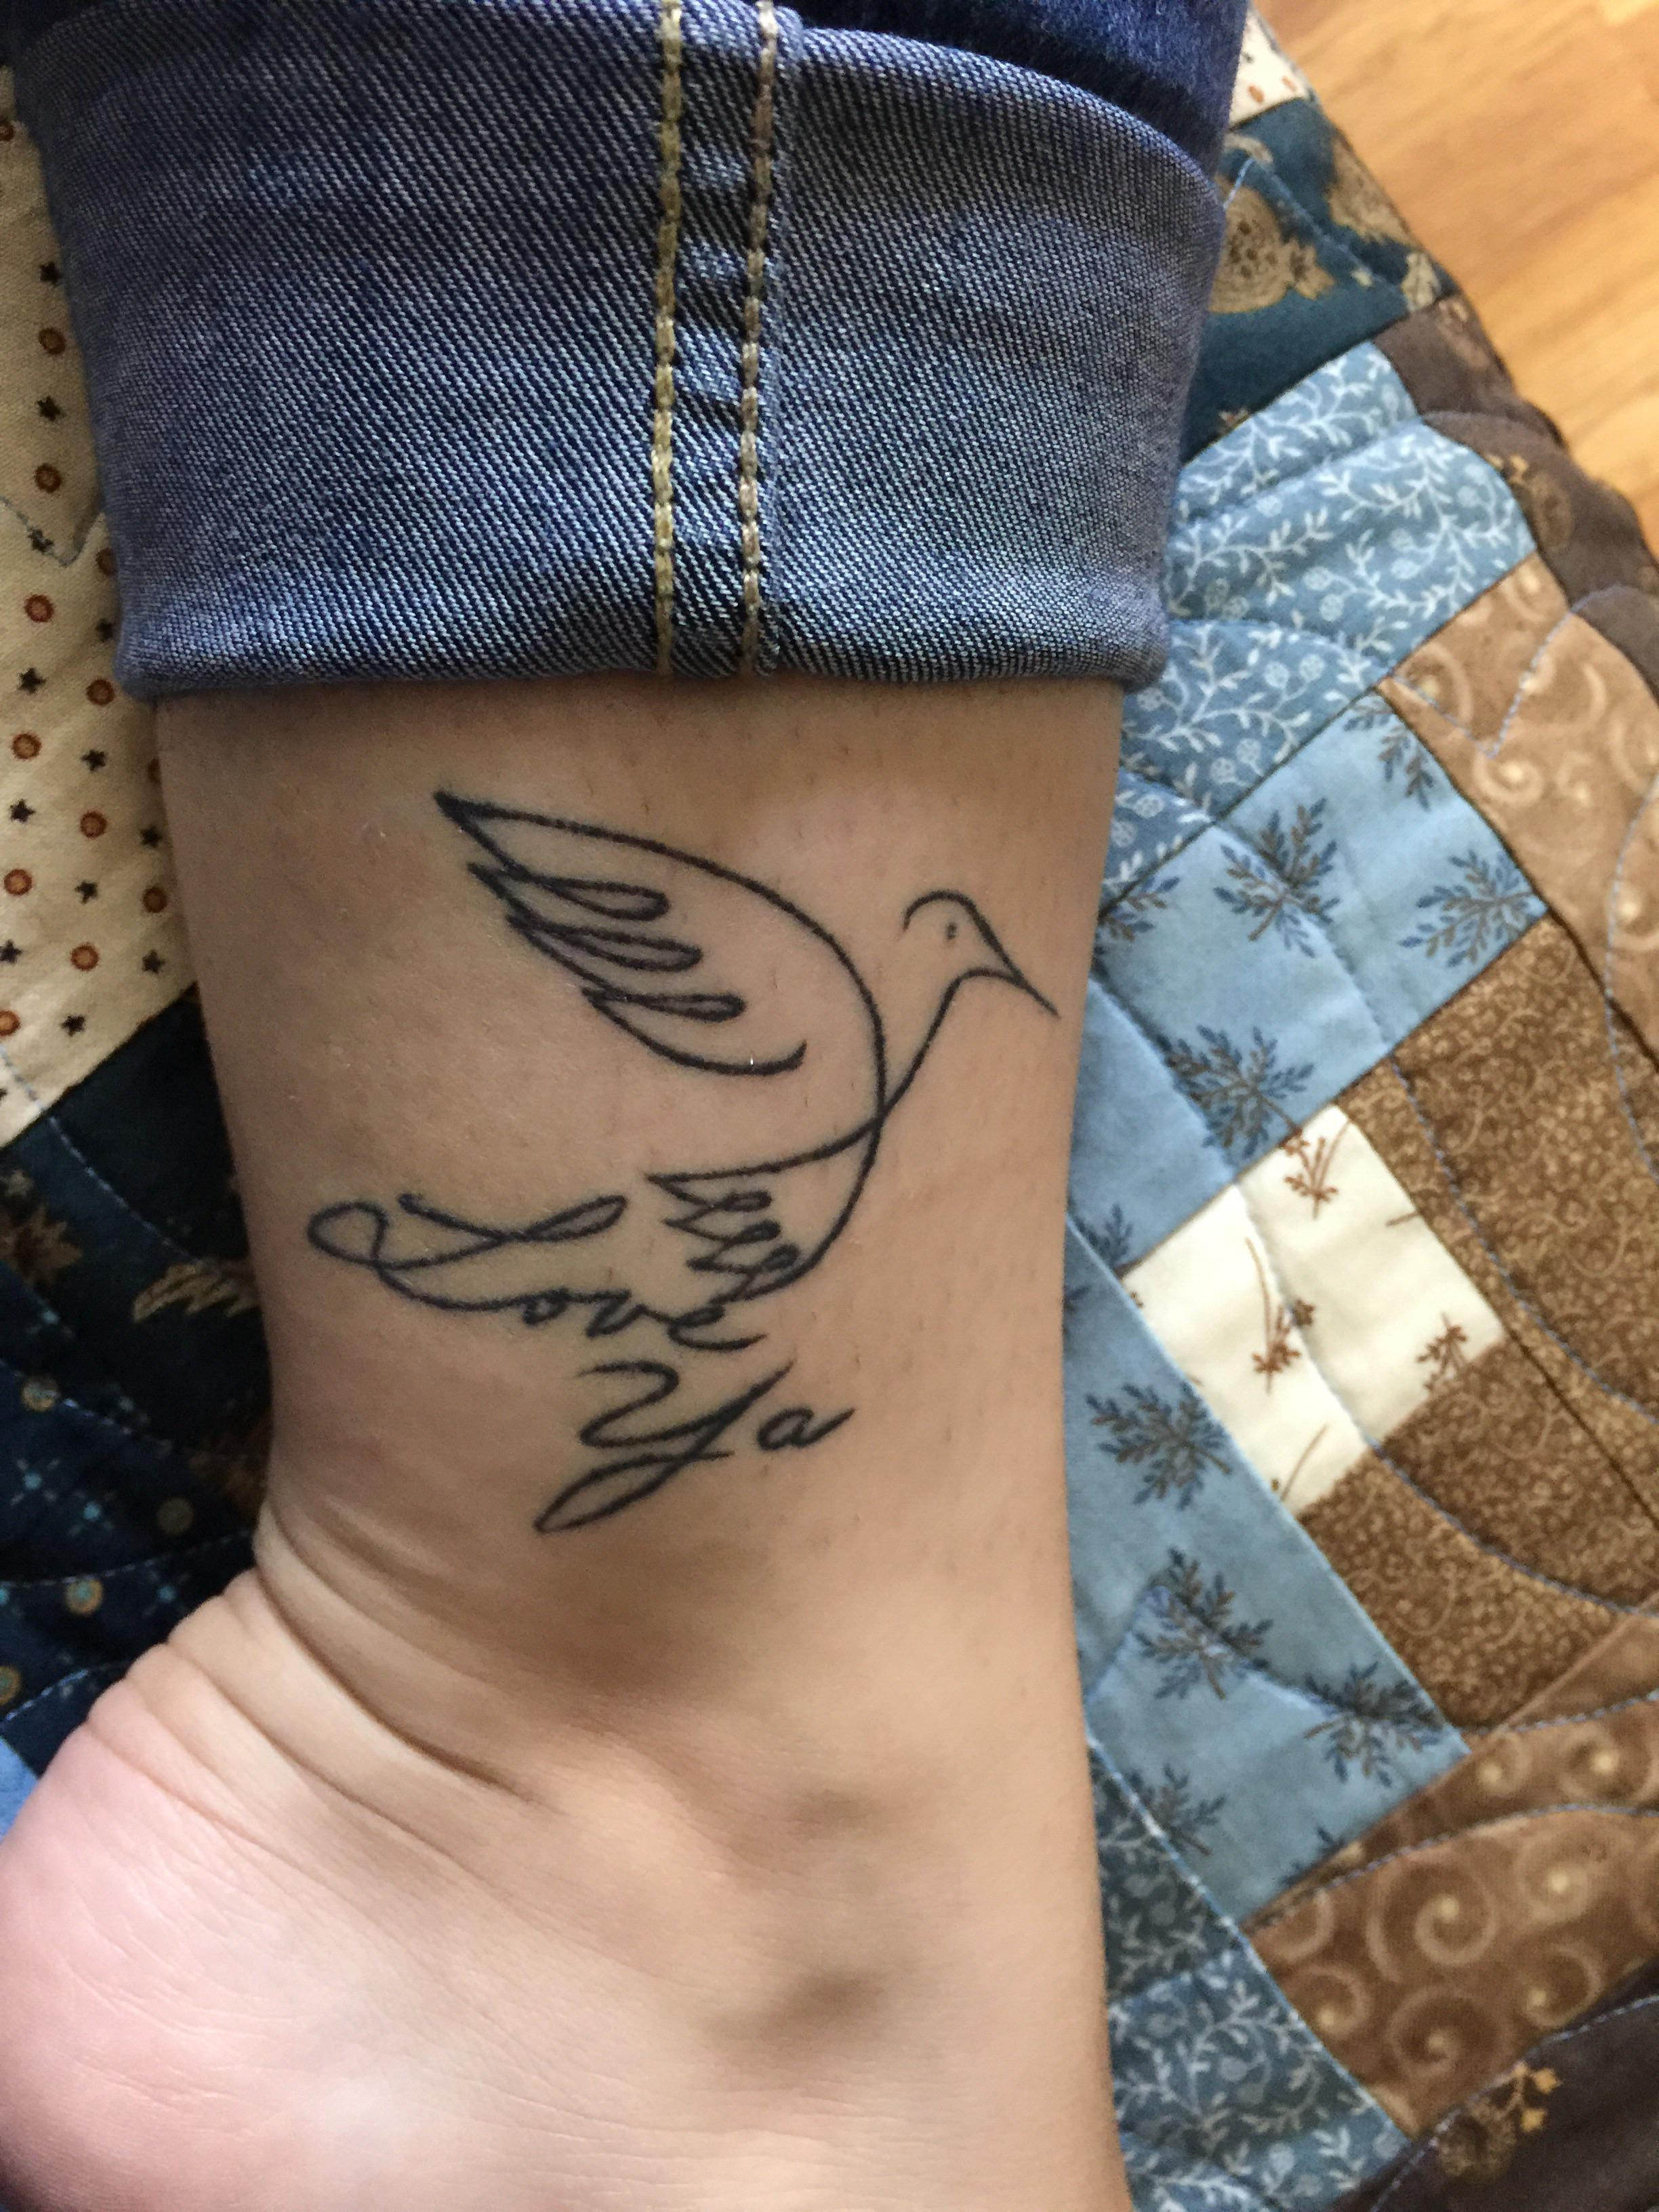 Memorial Tattoo For My Grandmother Her Handwriting And Favorite within proportions 2448 X 3264